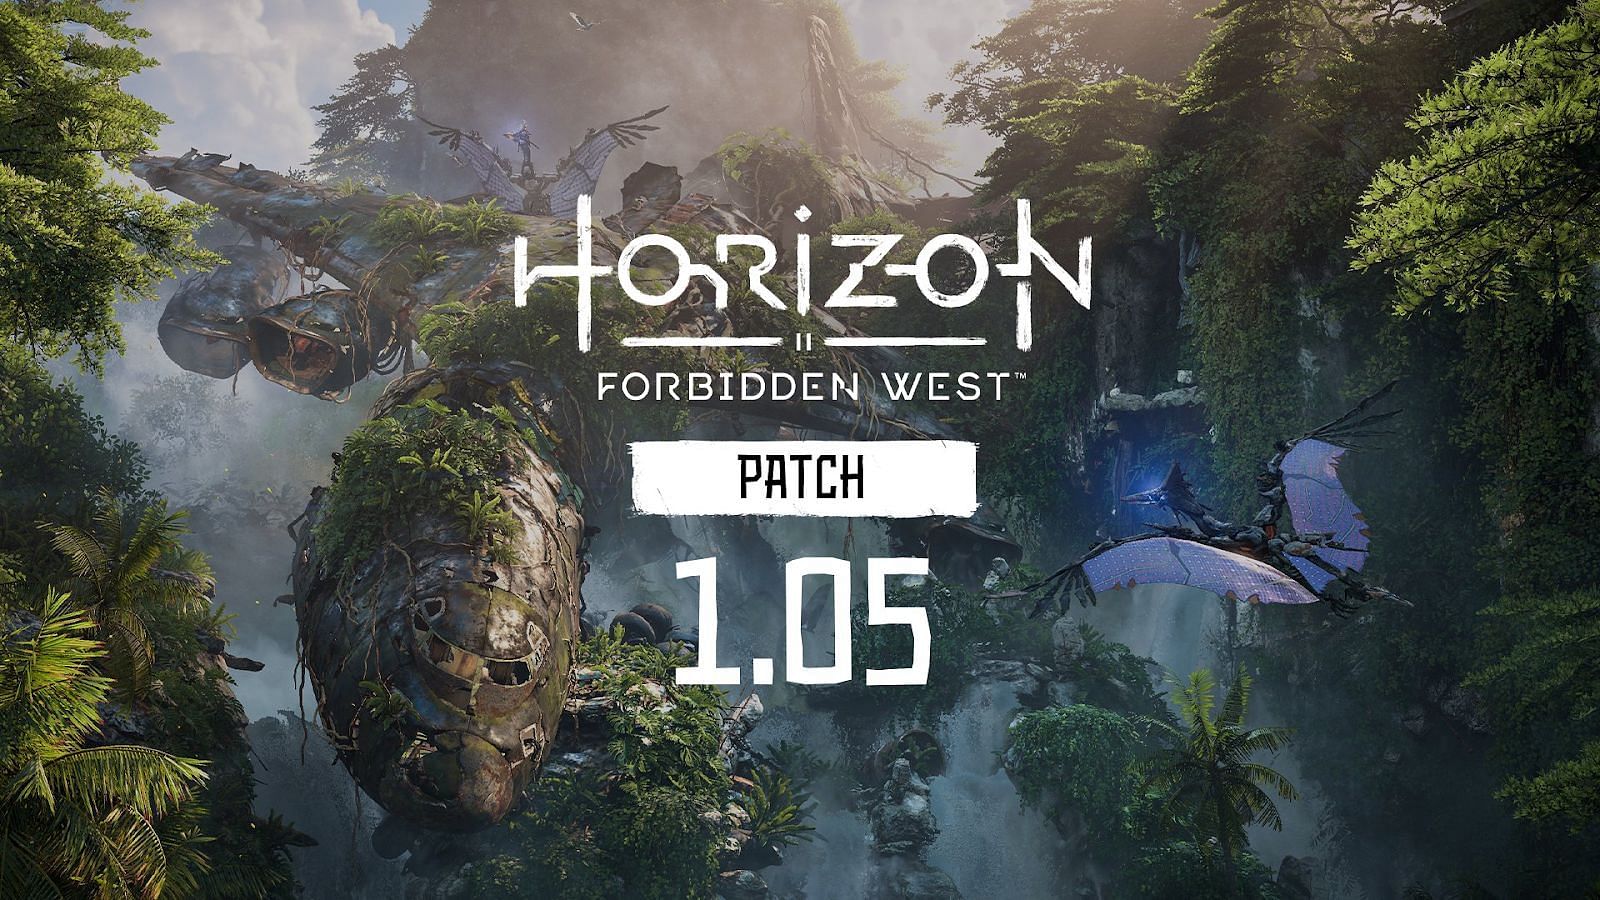 Horizon Forbidden West patch 1.05 (Image by Guerrilla Games)